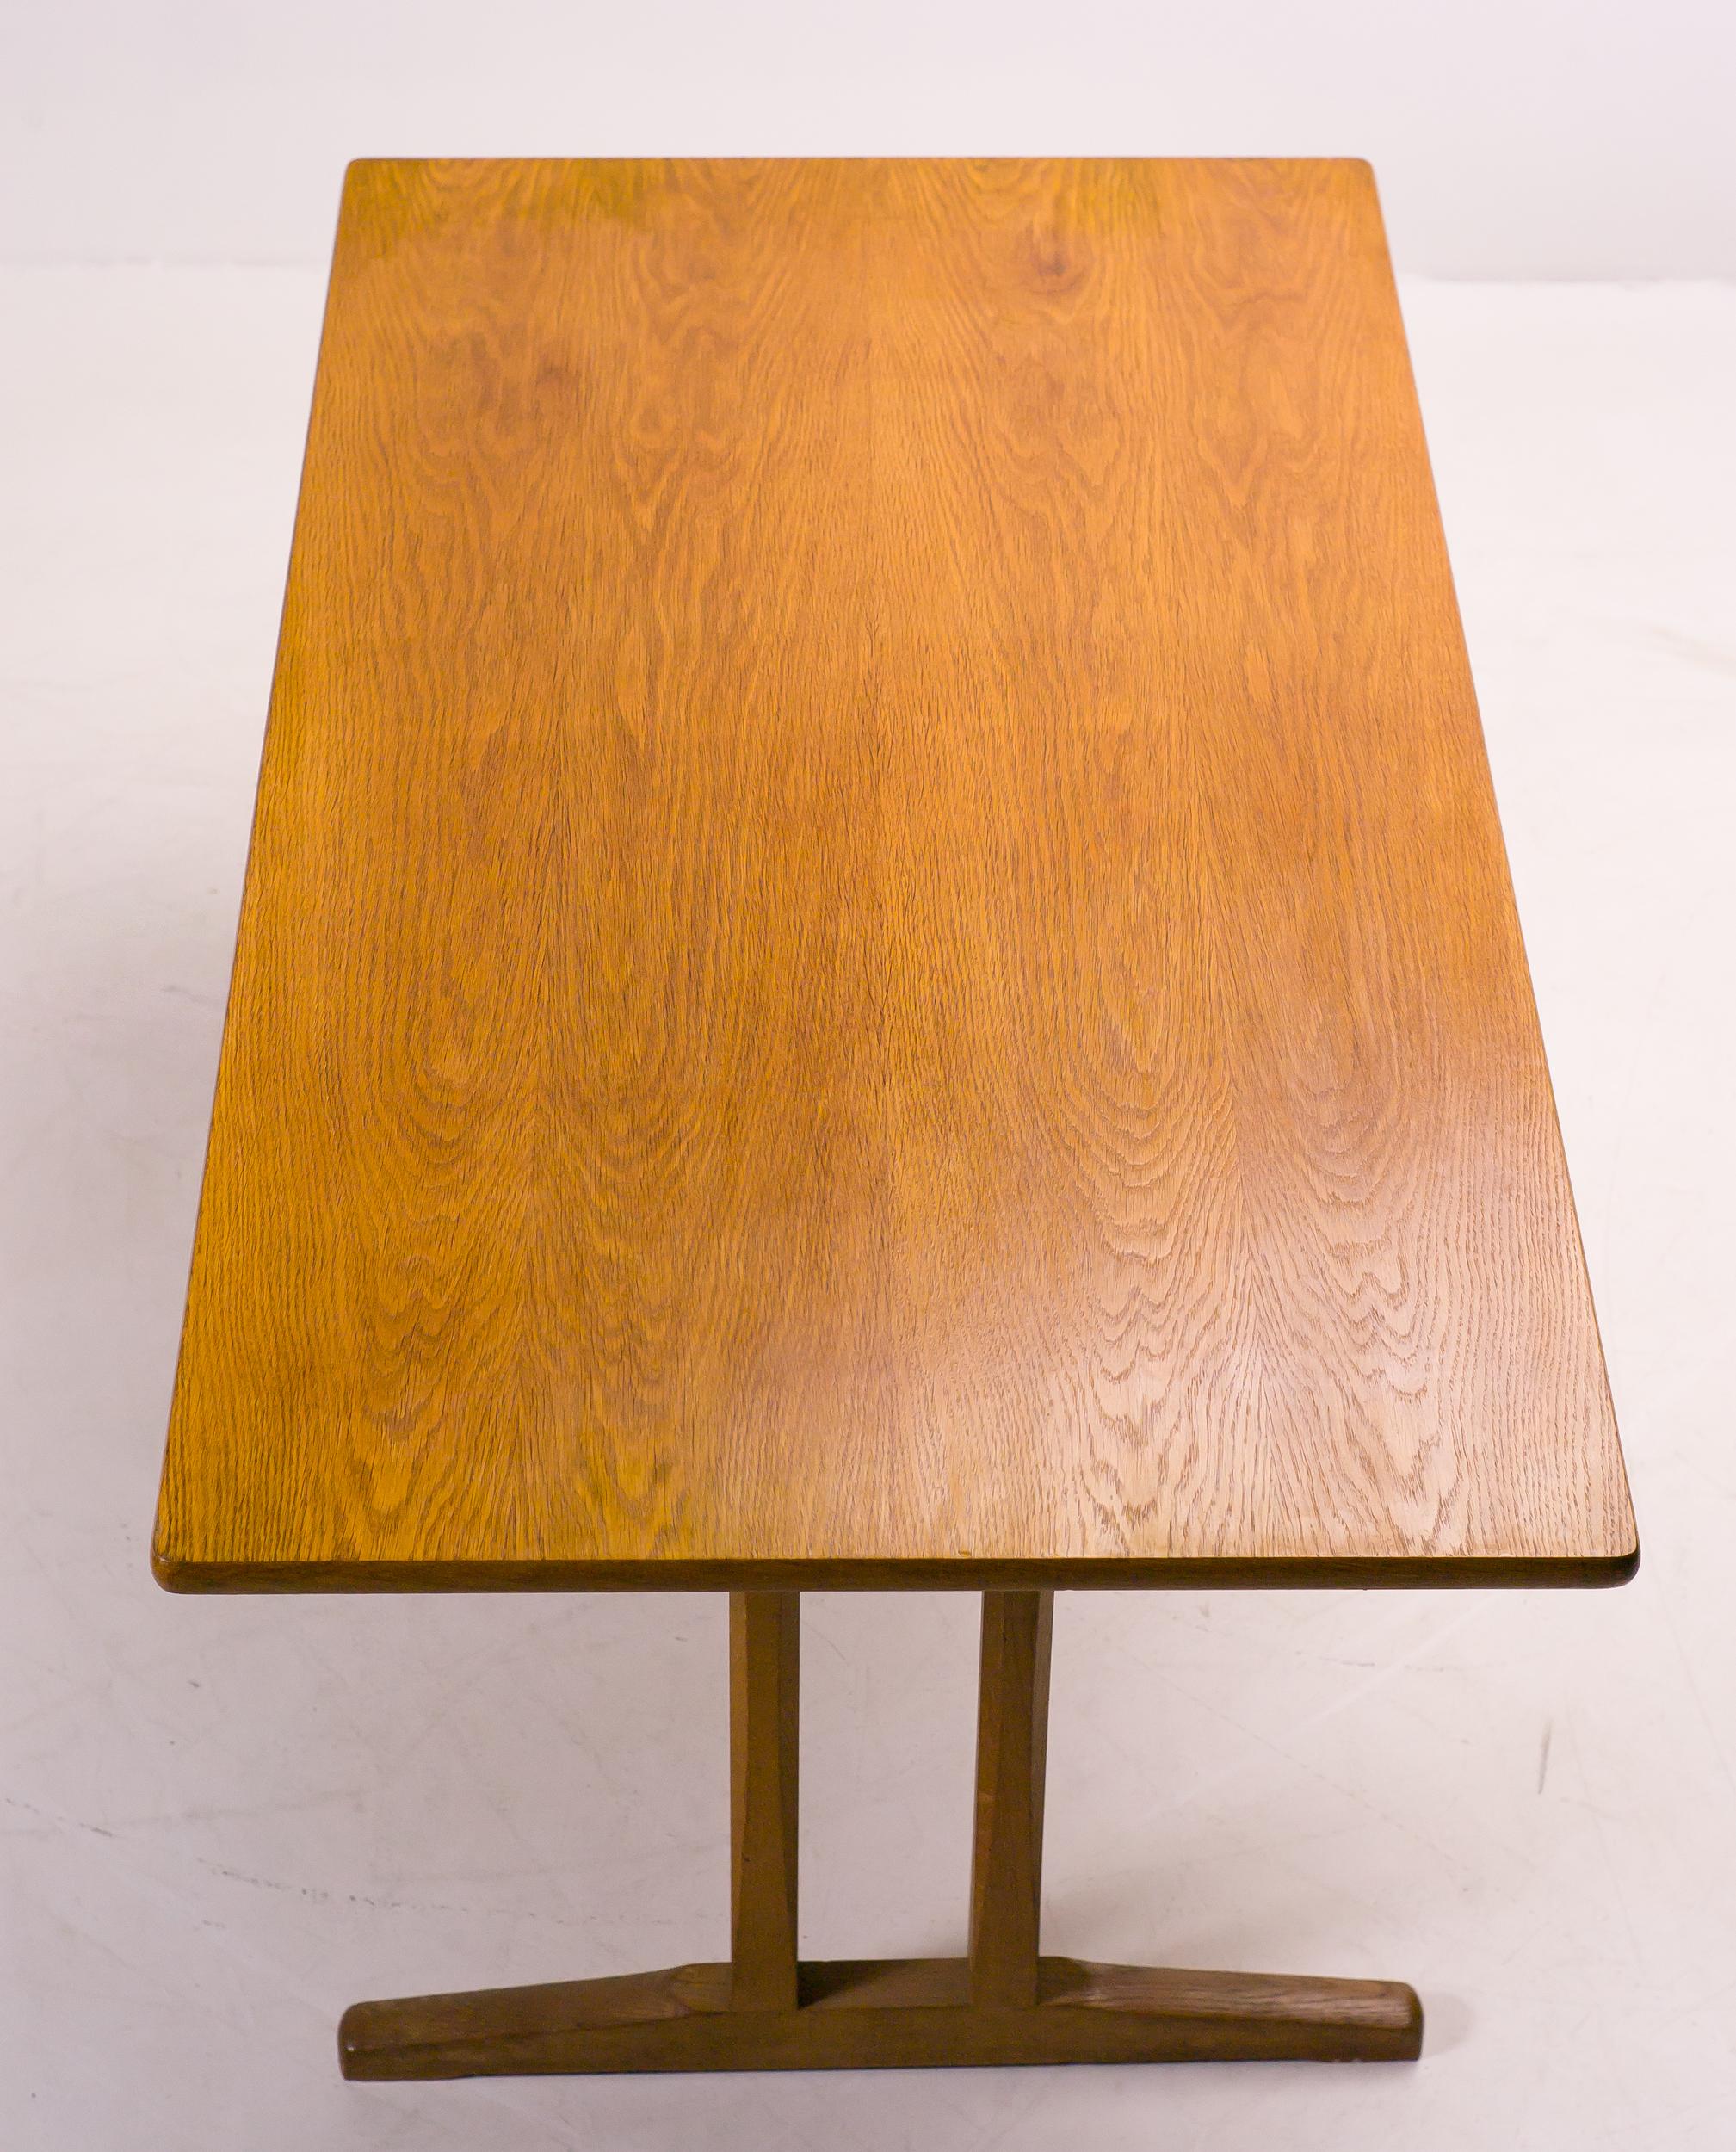 This dining table model C18, inspired by traditional shaker tables, was designed by Børge Mogensen for FDB Møbler, Denmark in 1947.
The trestle legs are inset allowing the person sitting at the table to enjoy a generous amount of leg room. The